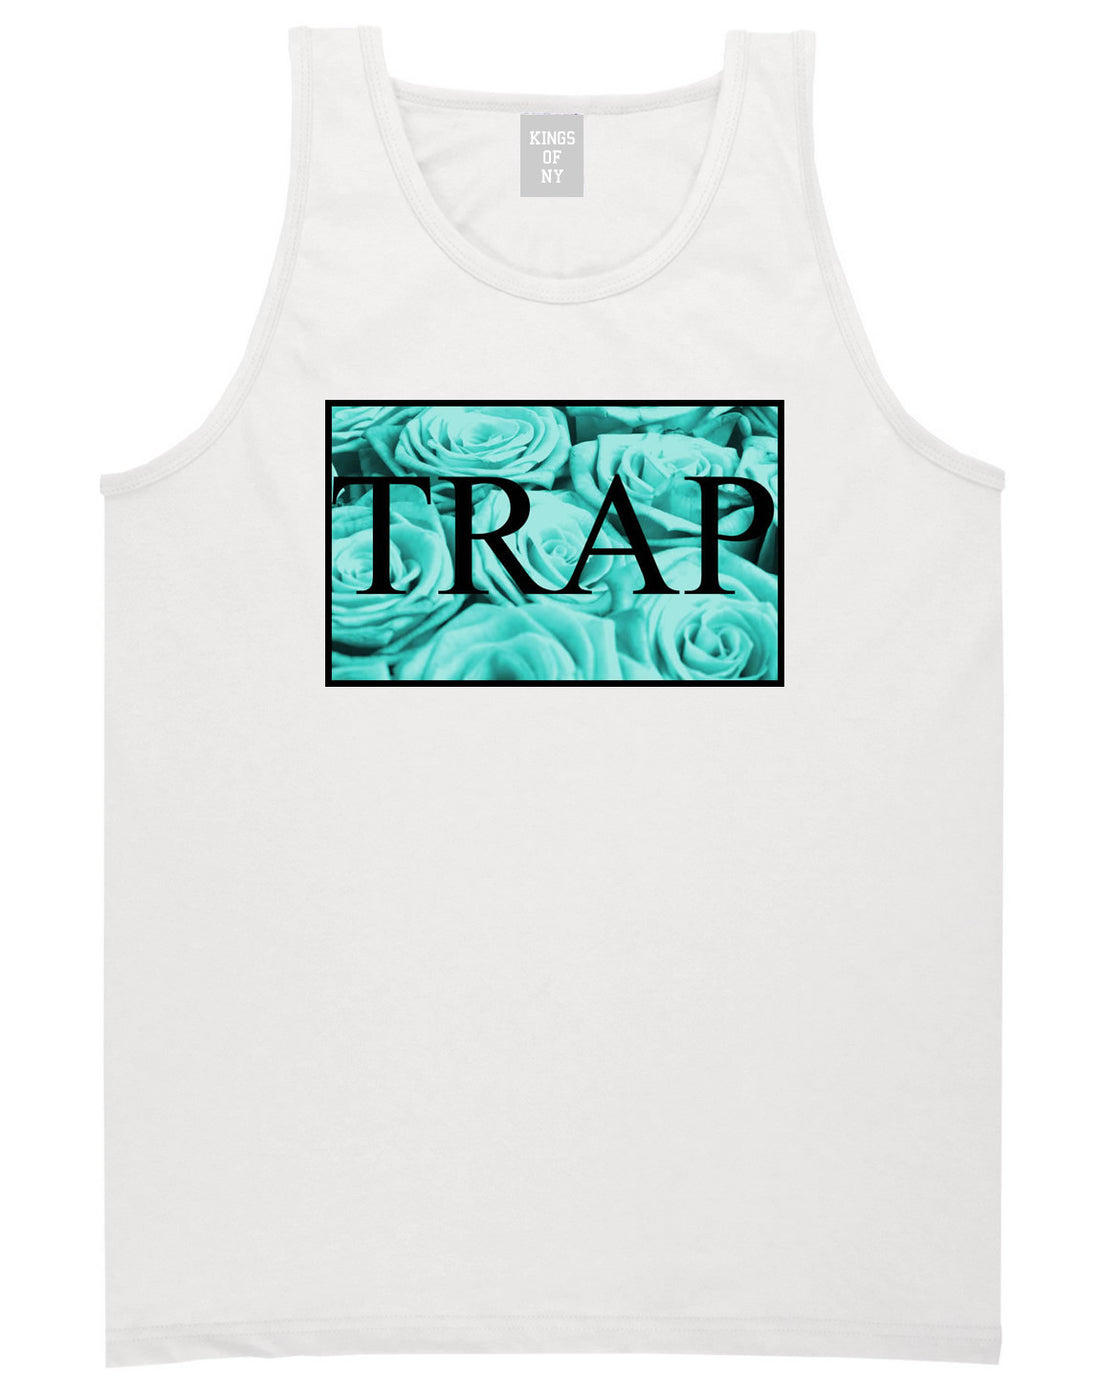 Trap Floral Style Hood Music Hood Dope Tank Top In White by Kings Of NY